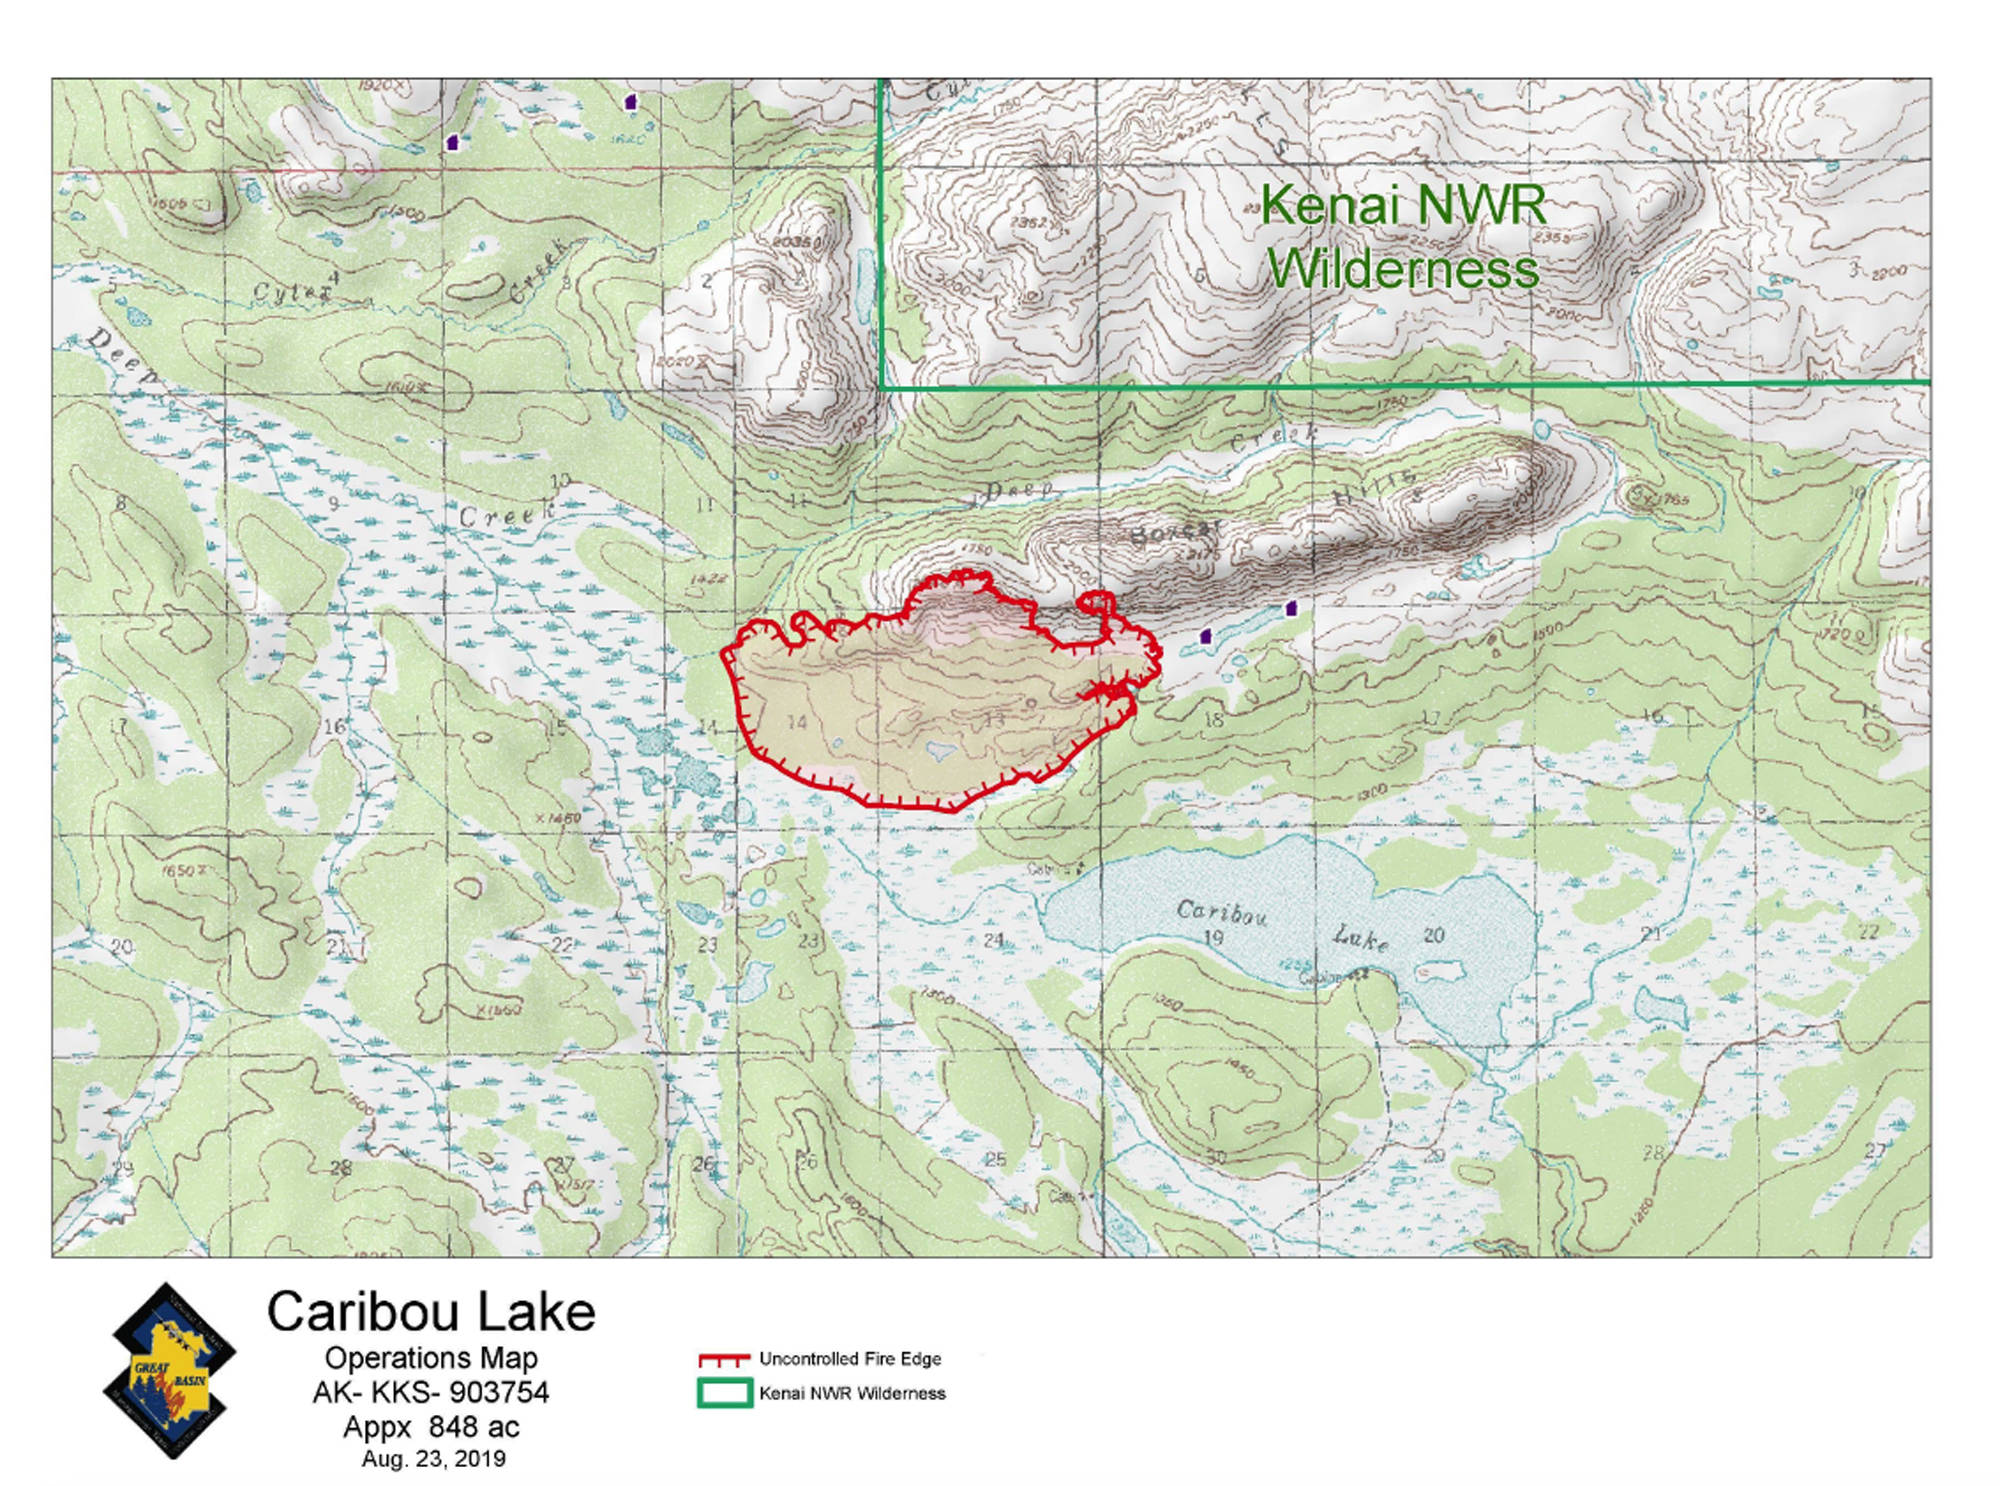 North Fork Fire nears containment; Ready alert canceled